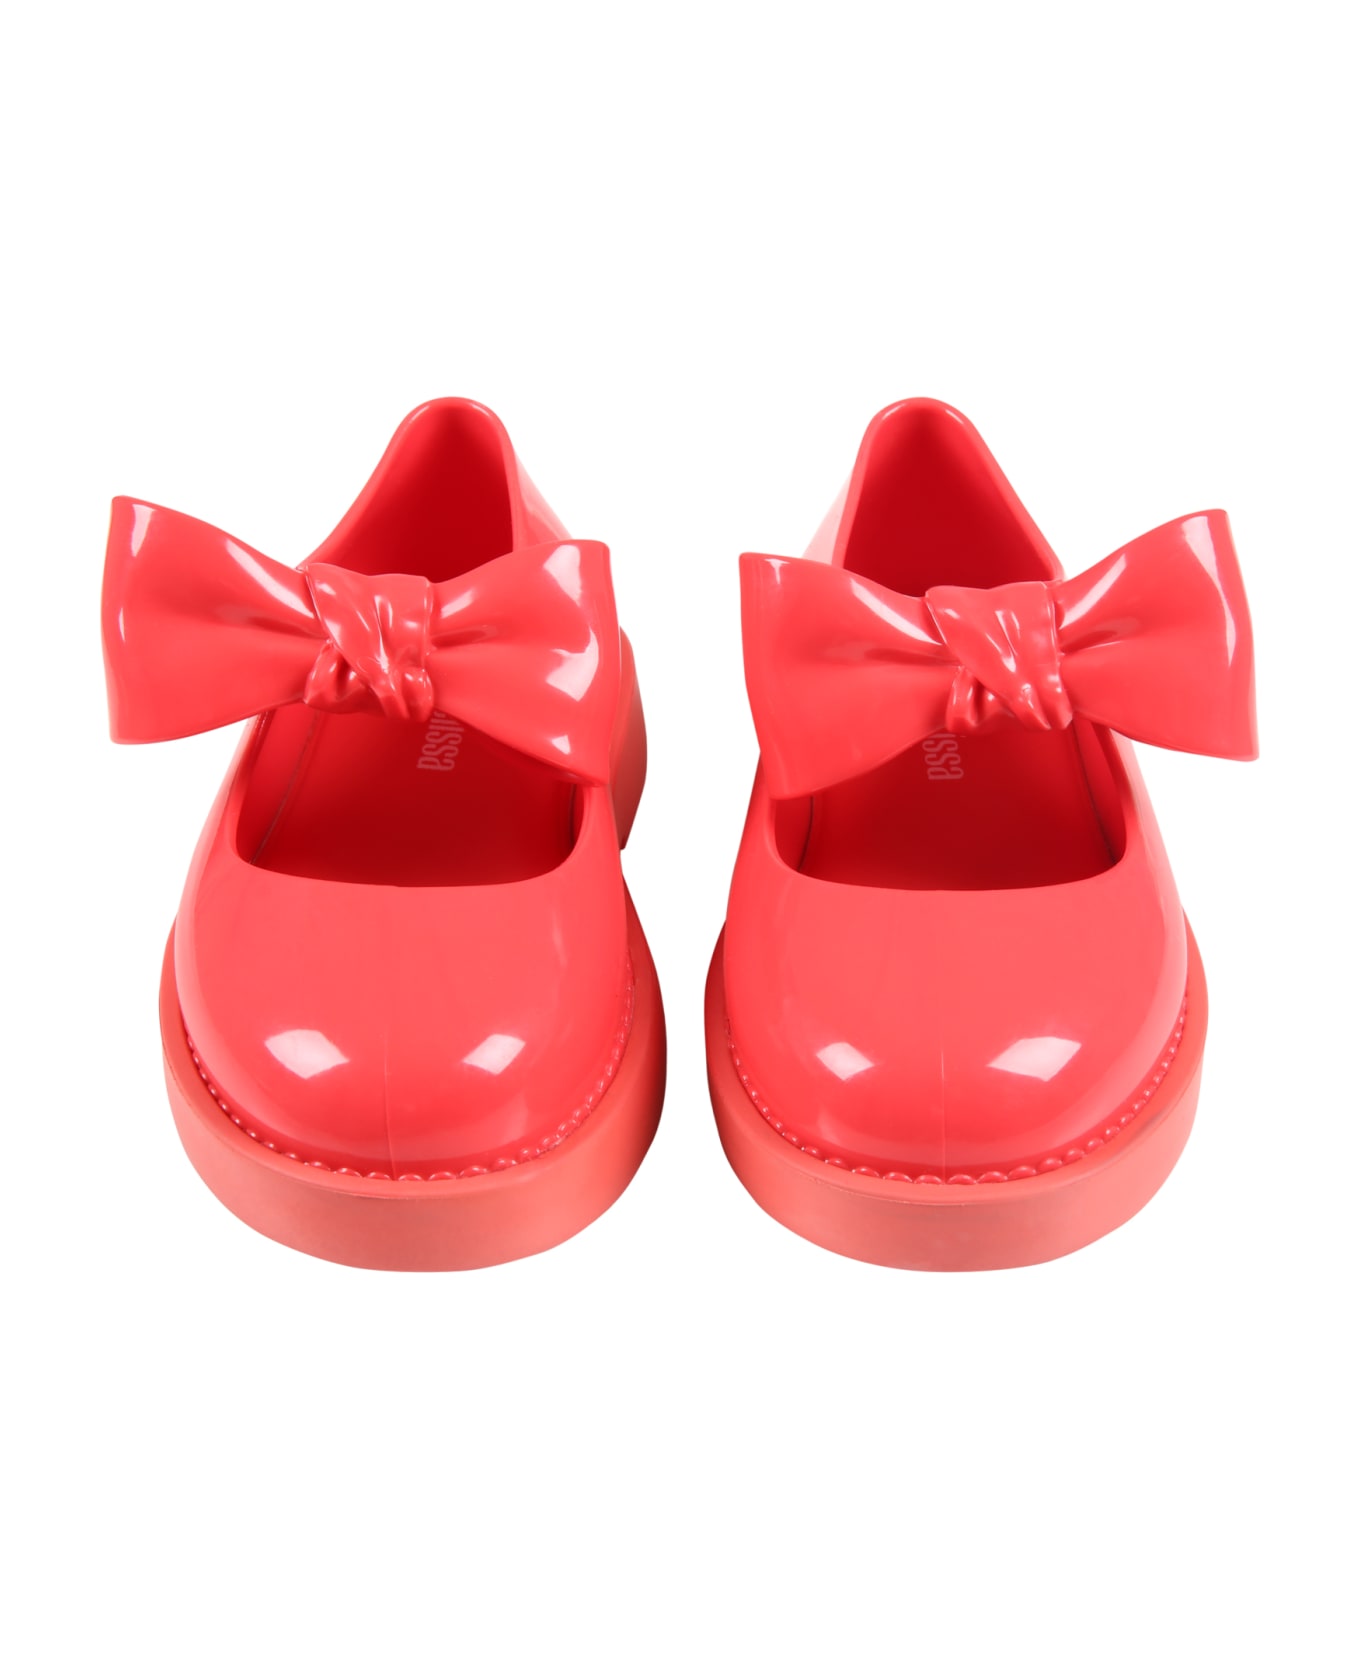 Melissa Red Ballerina Flats For Girl With Bow - Red シューズ